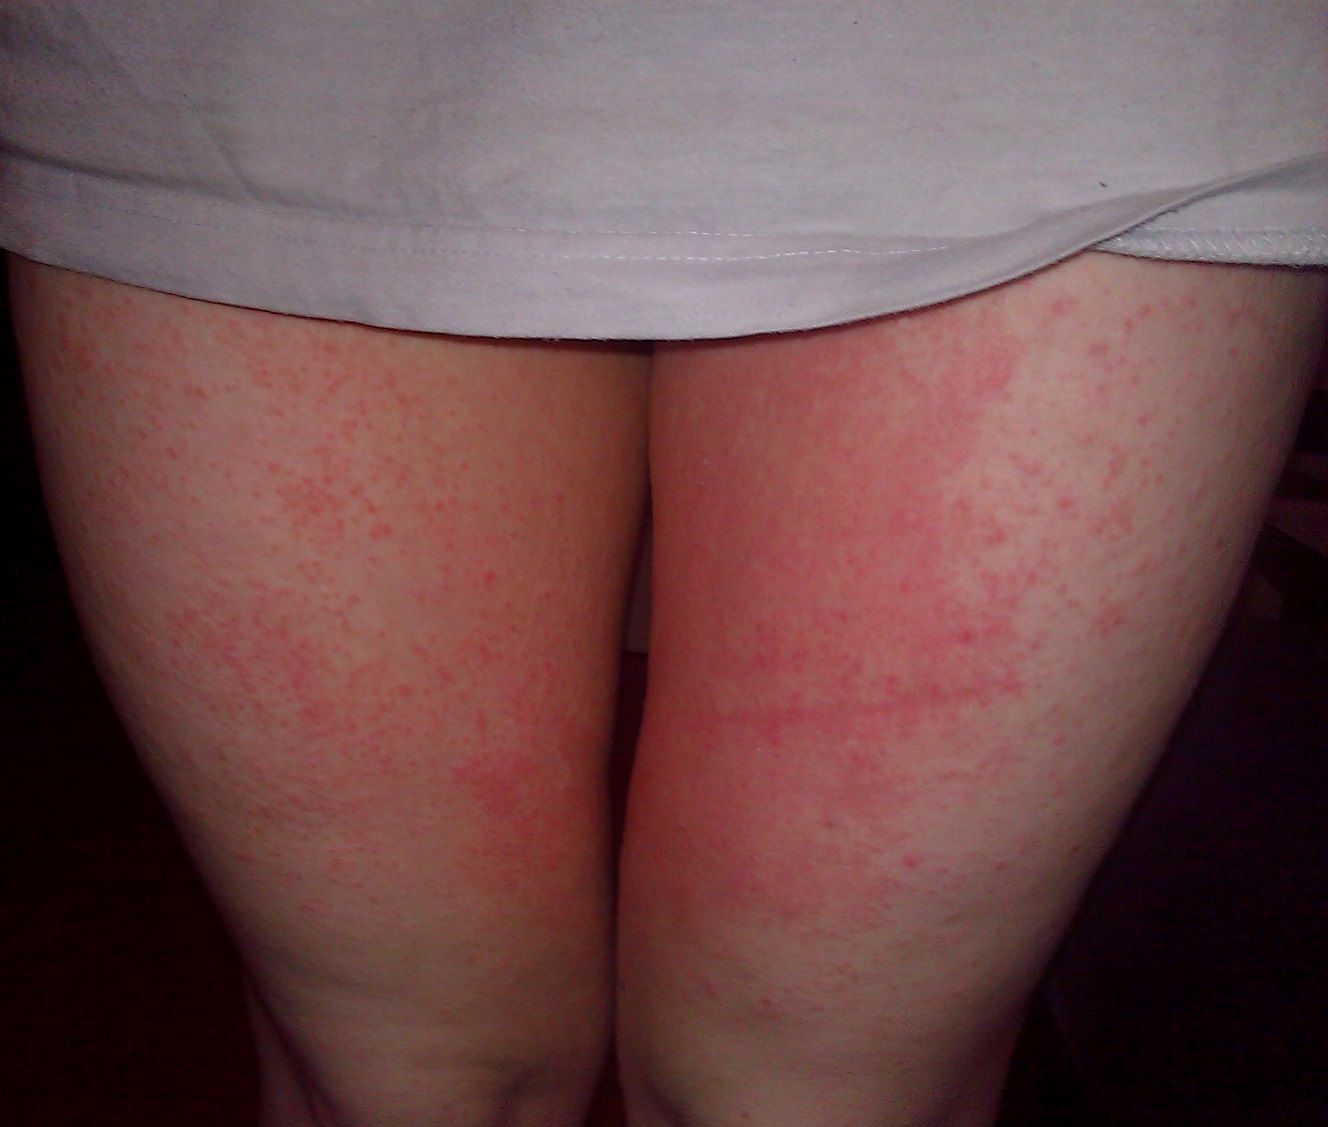 How to Stop Rashes Between Legs - No More Chafe - Thigh Guards